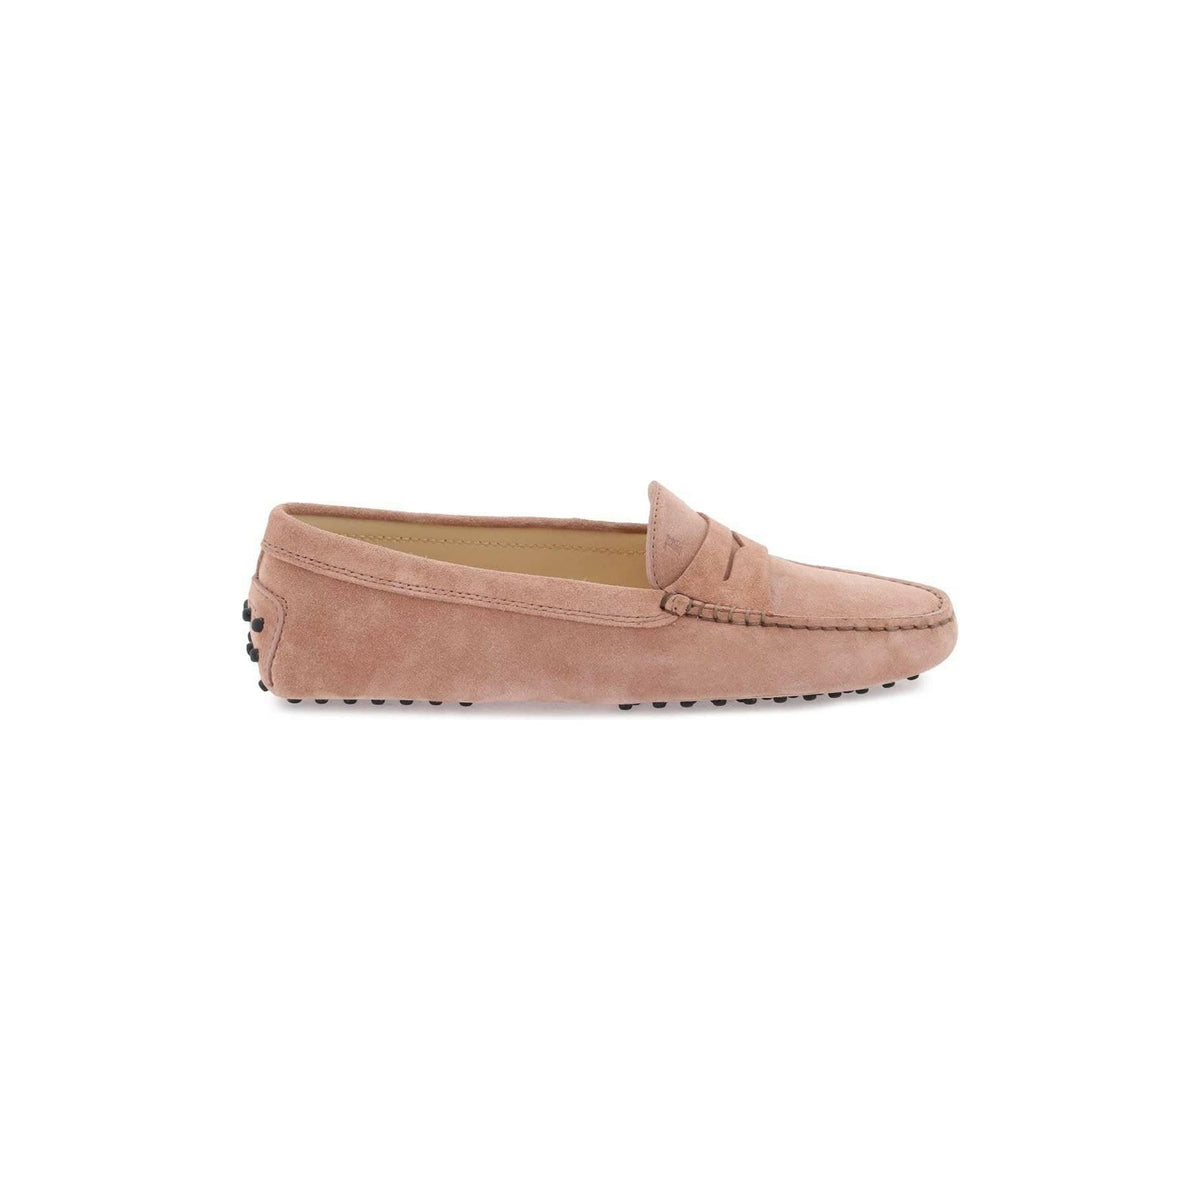 TOD'S - Gommino Suede Loafers - JOHN JULIA